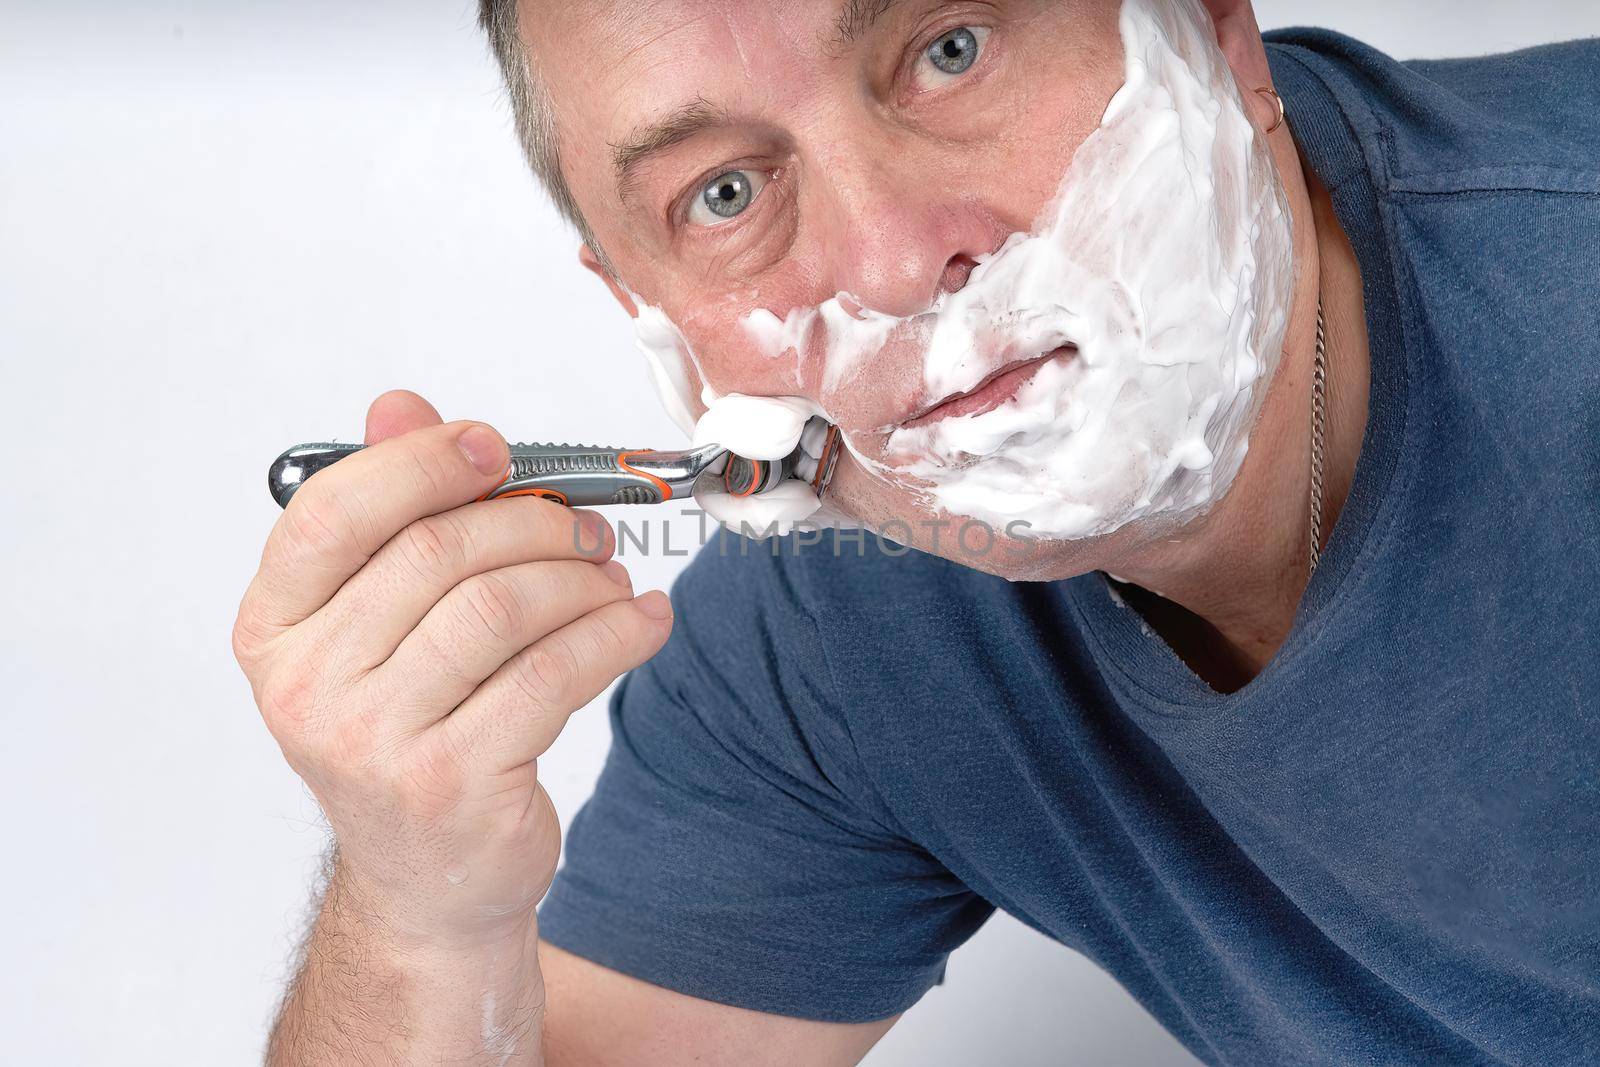 A man's face in shaving foam shaves with a safety razor. Morning or evening exercise, personal hygiene